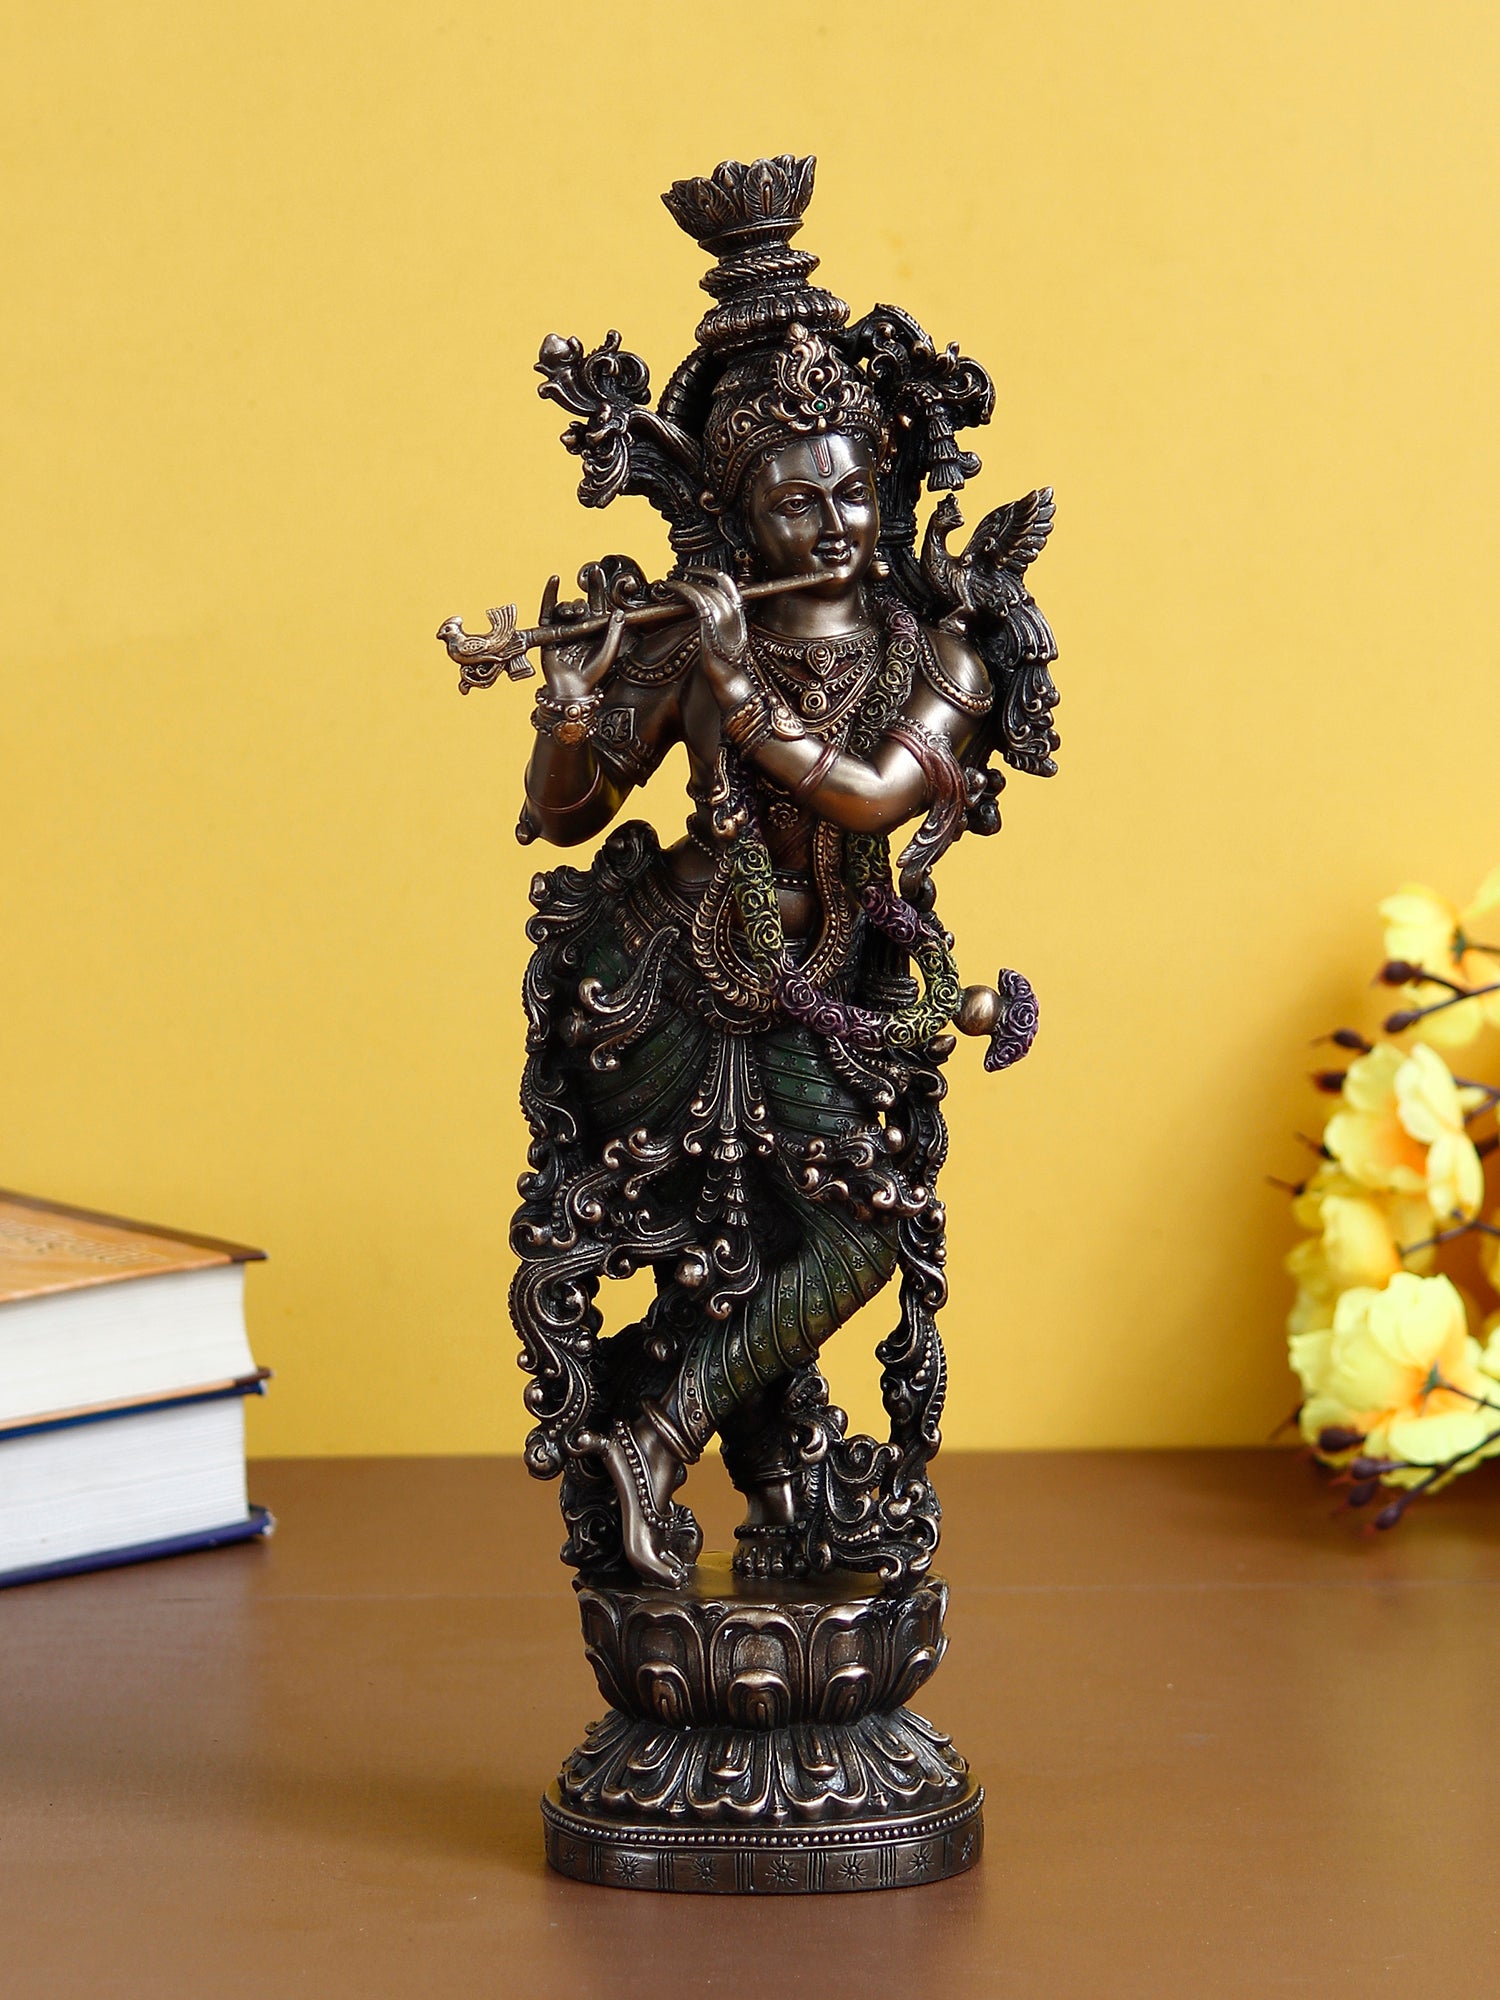 Brown Polyresin and Bronze Decorative Ethnic Carved Dancing Lord Krishna Playing Flute Figurine 1